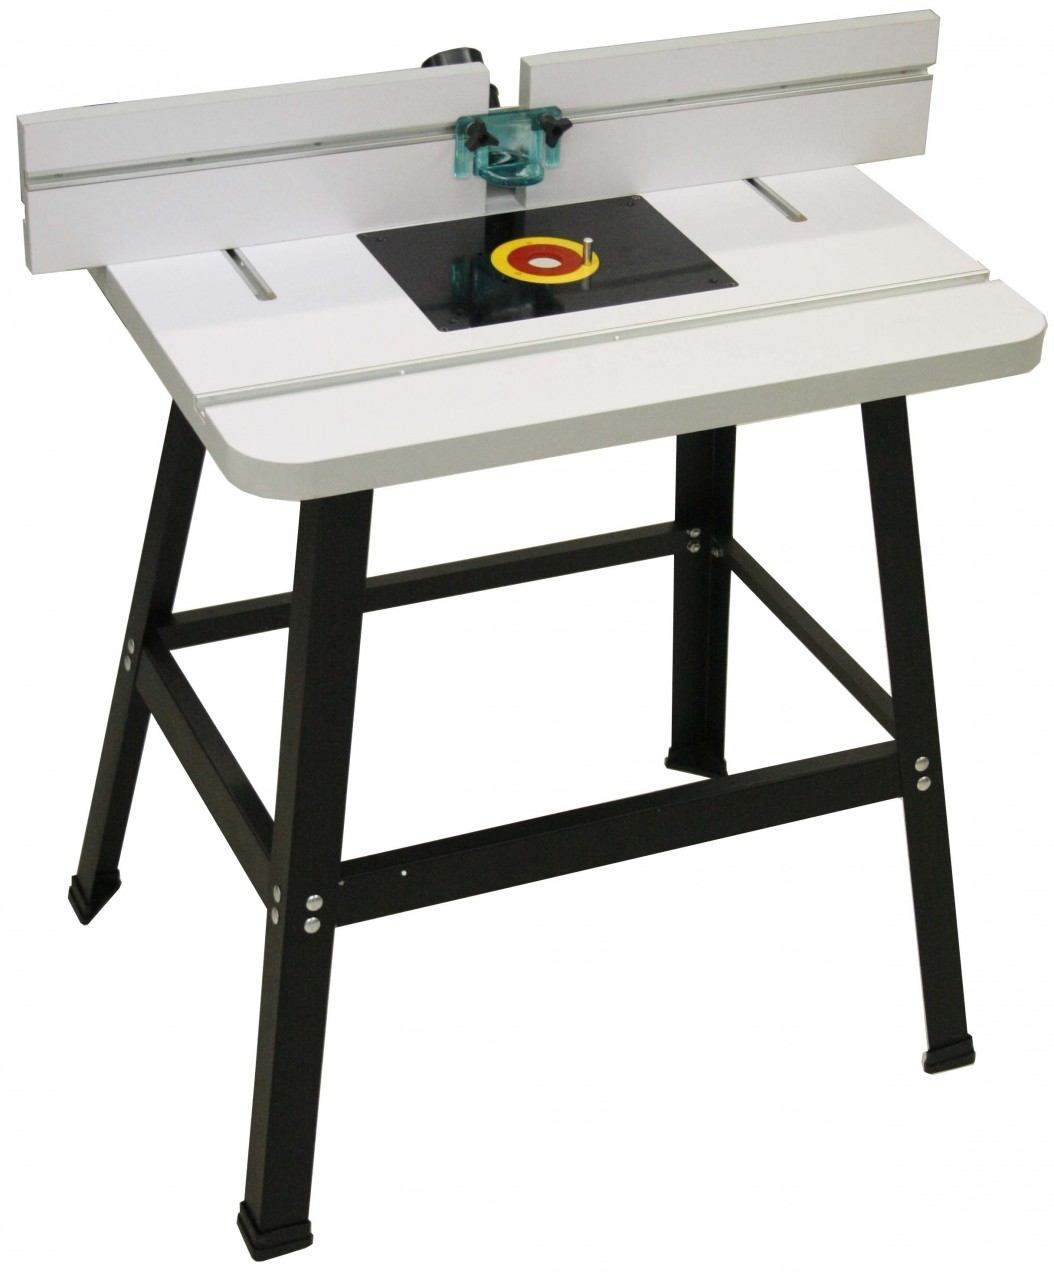 Buy Router Table W/stand And Fence at Busy Bee Tools